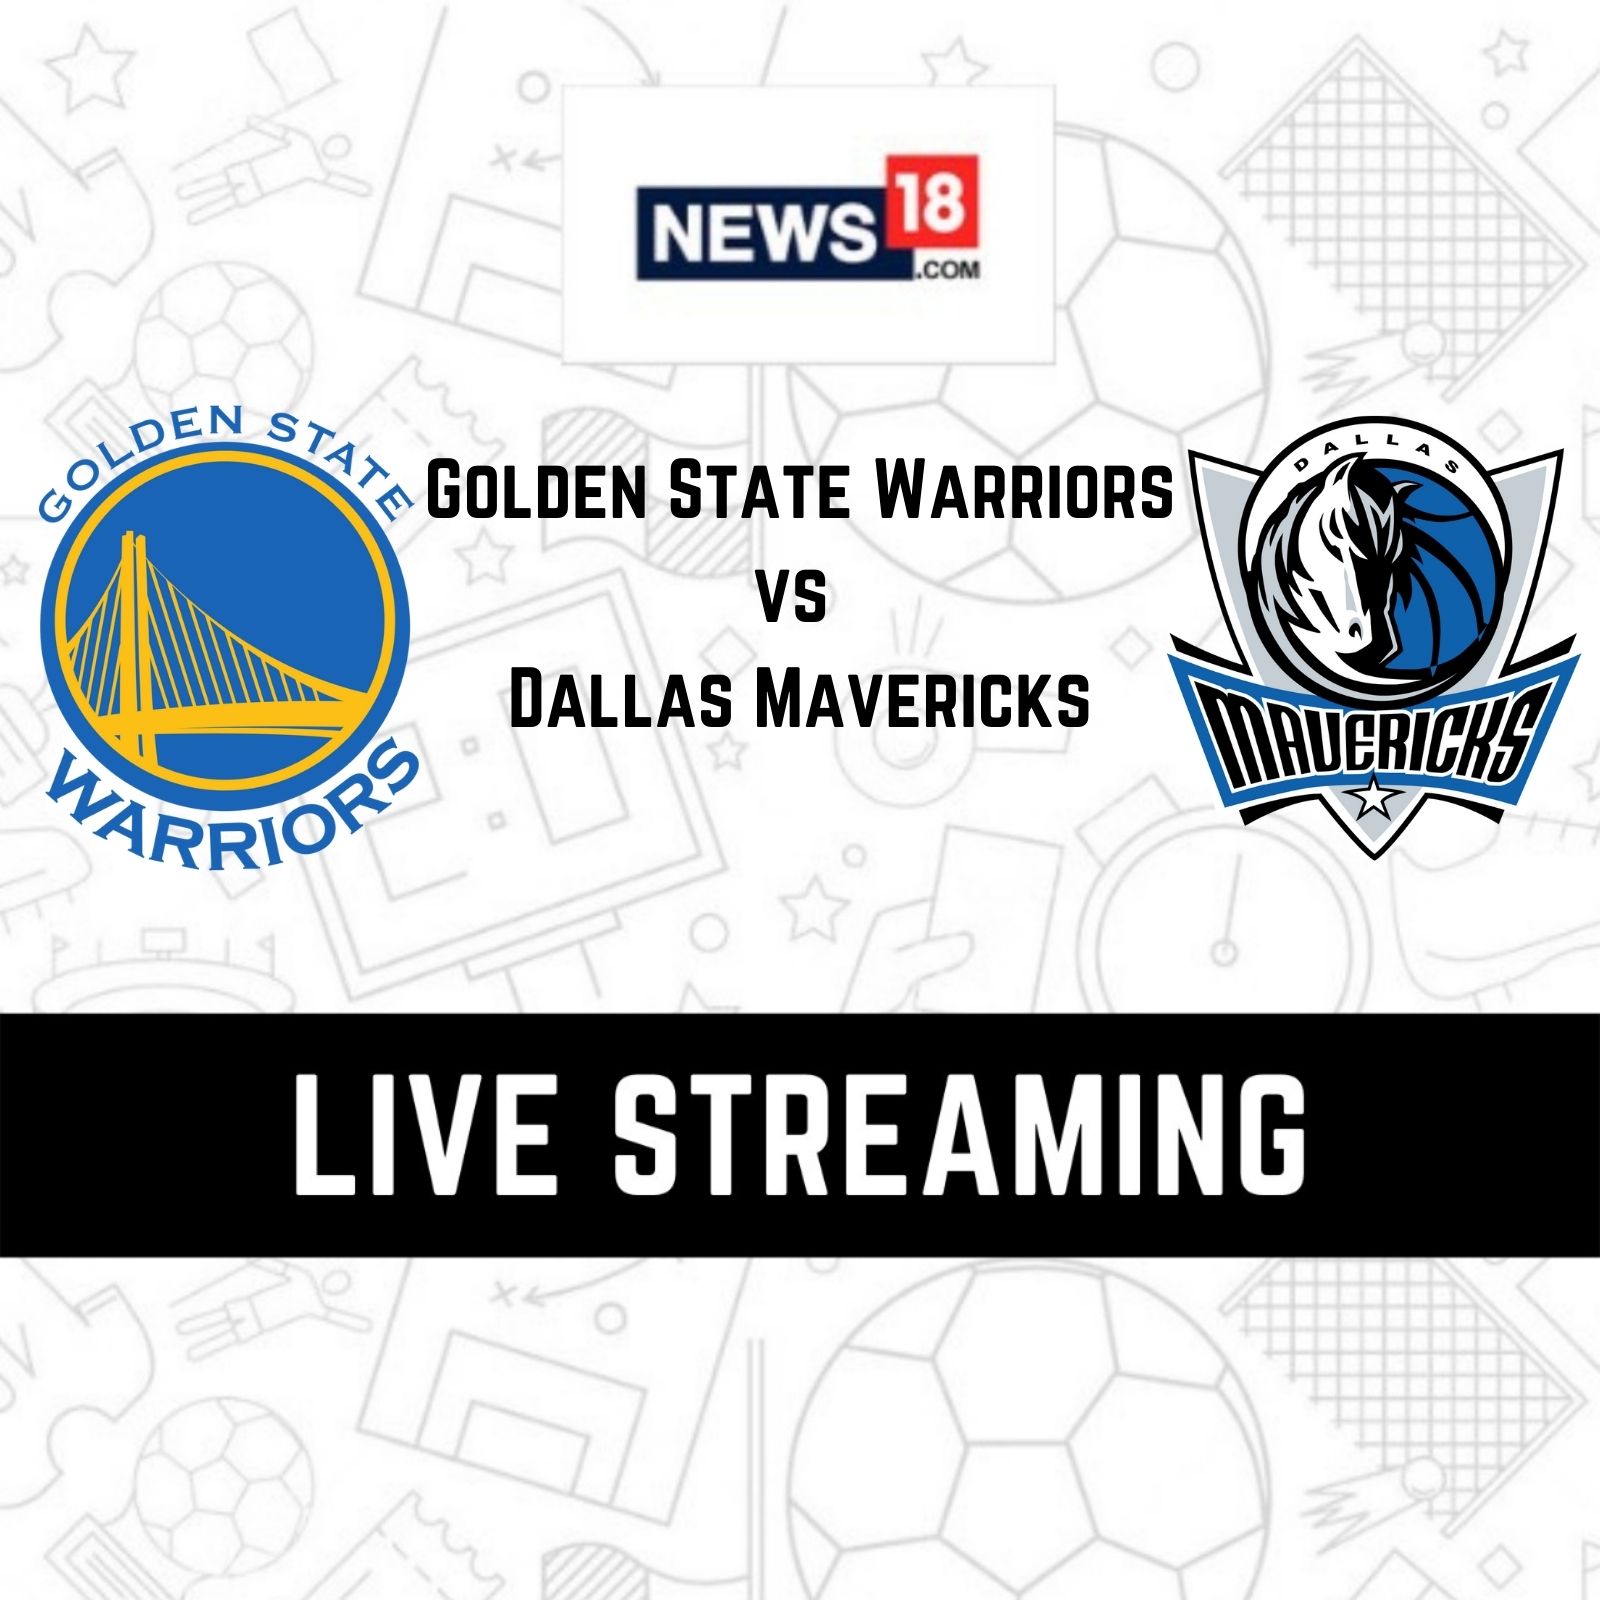 Dallas Mavericks vs Golden State Warriors Live Streaming When and Where to Watch NBA 2022 Conference Finals live Coverage on Live TV Online